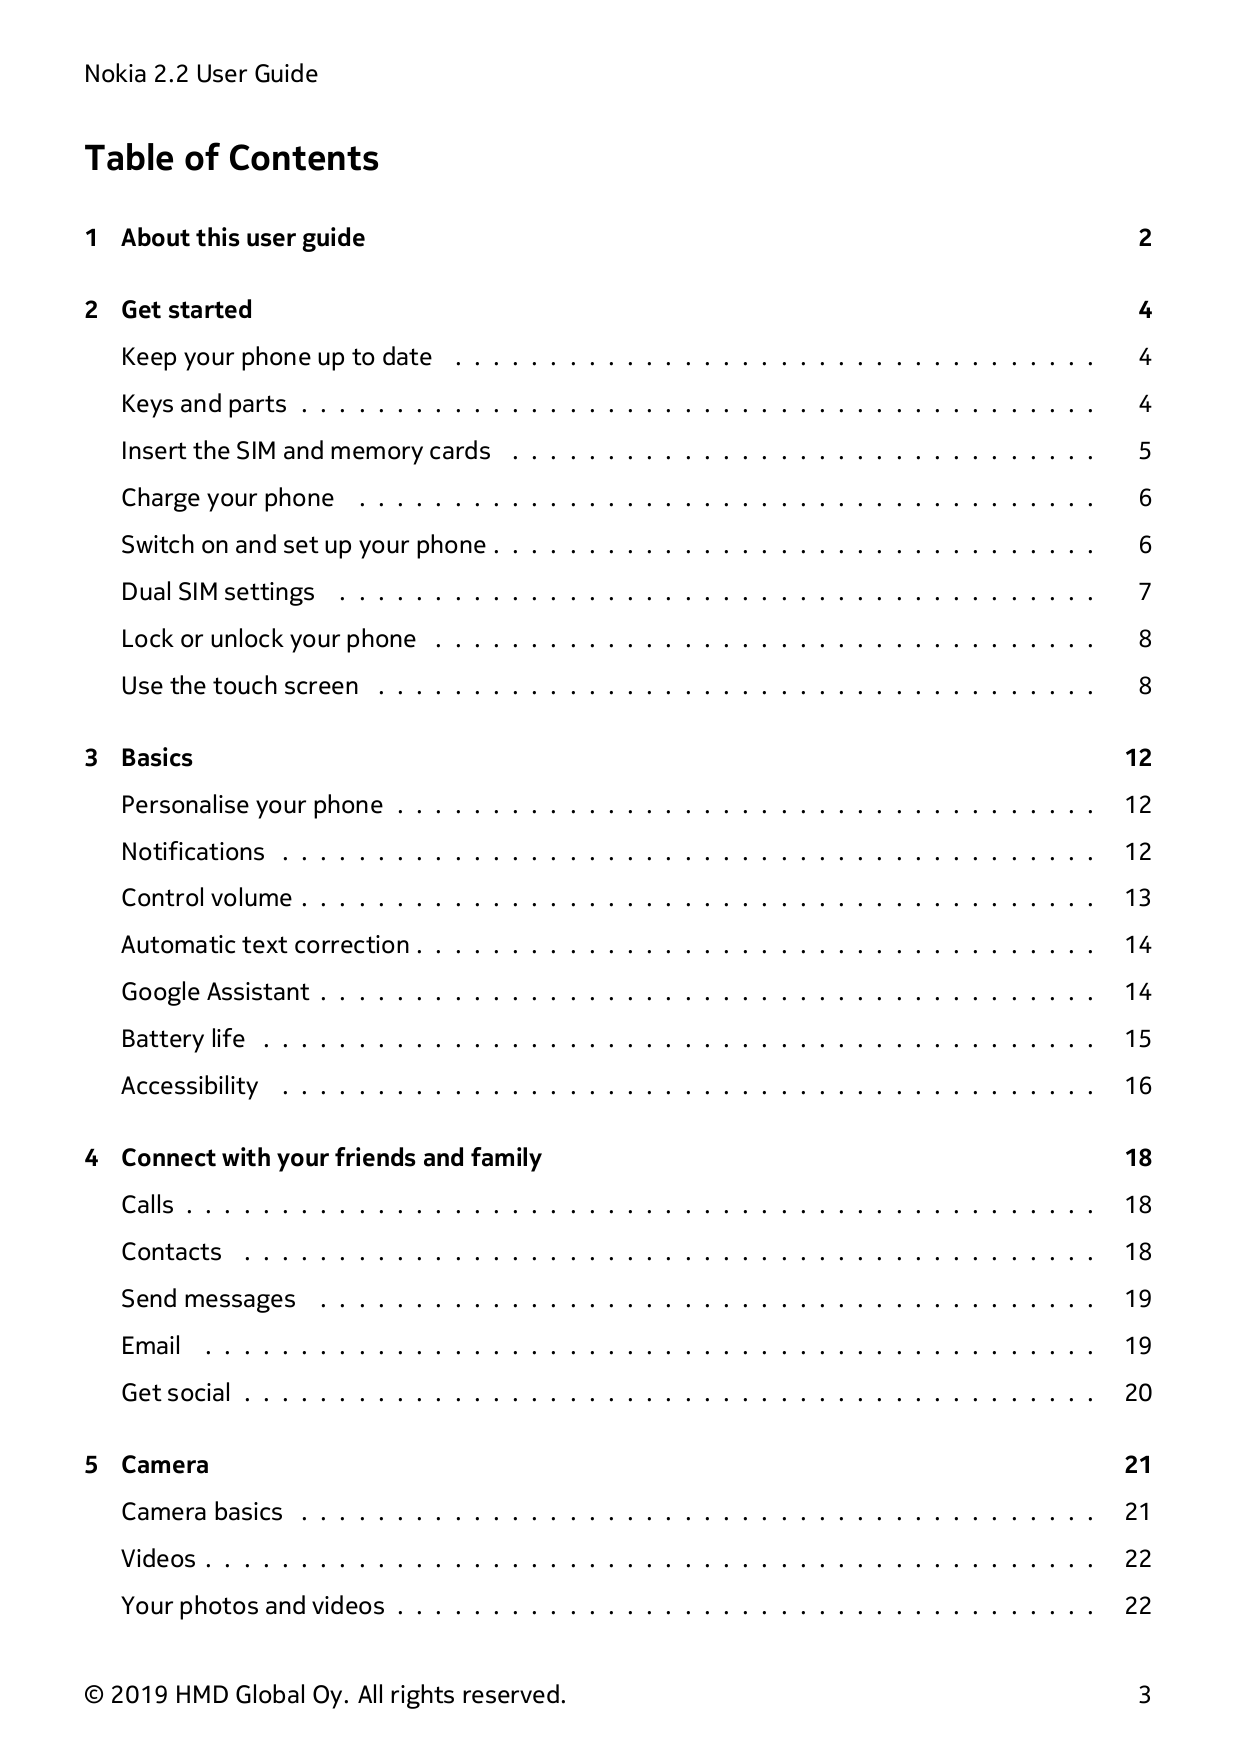 Nokia 2.2 User GuideTable of Contents1 About this user guide22 Get started4Keep your phone up to date . . . . . . . . . . . . . 